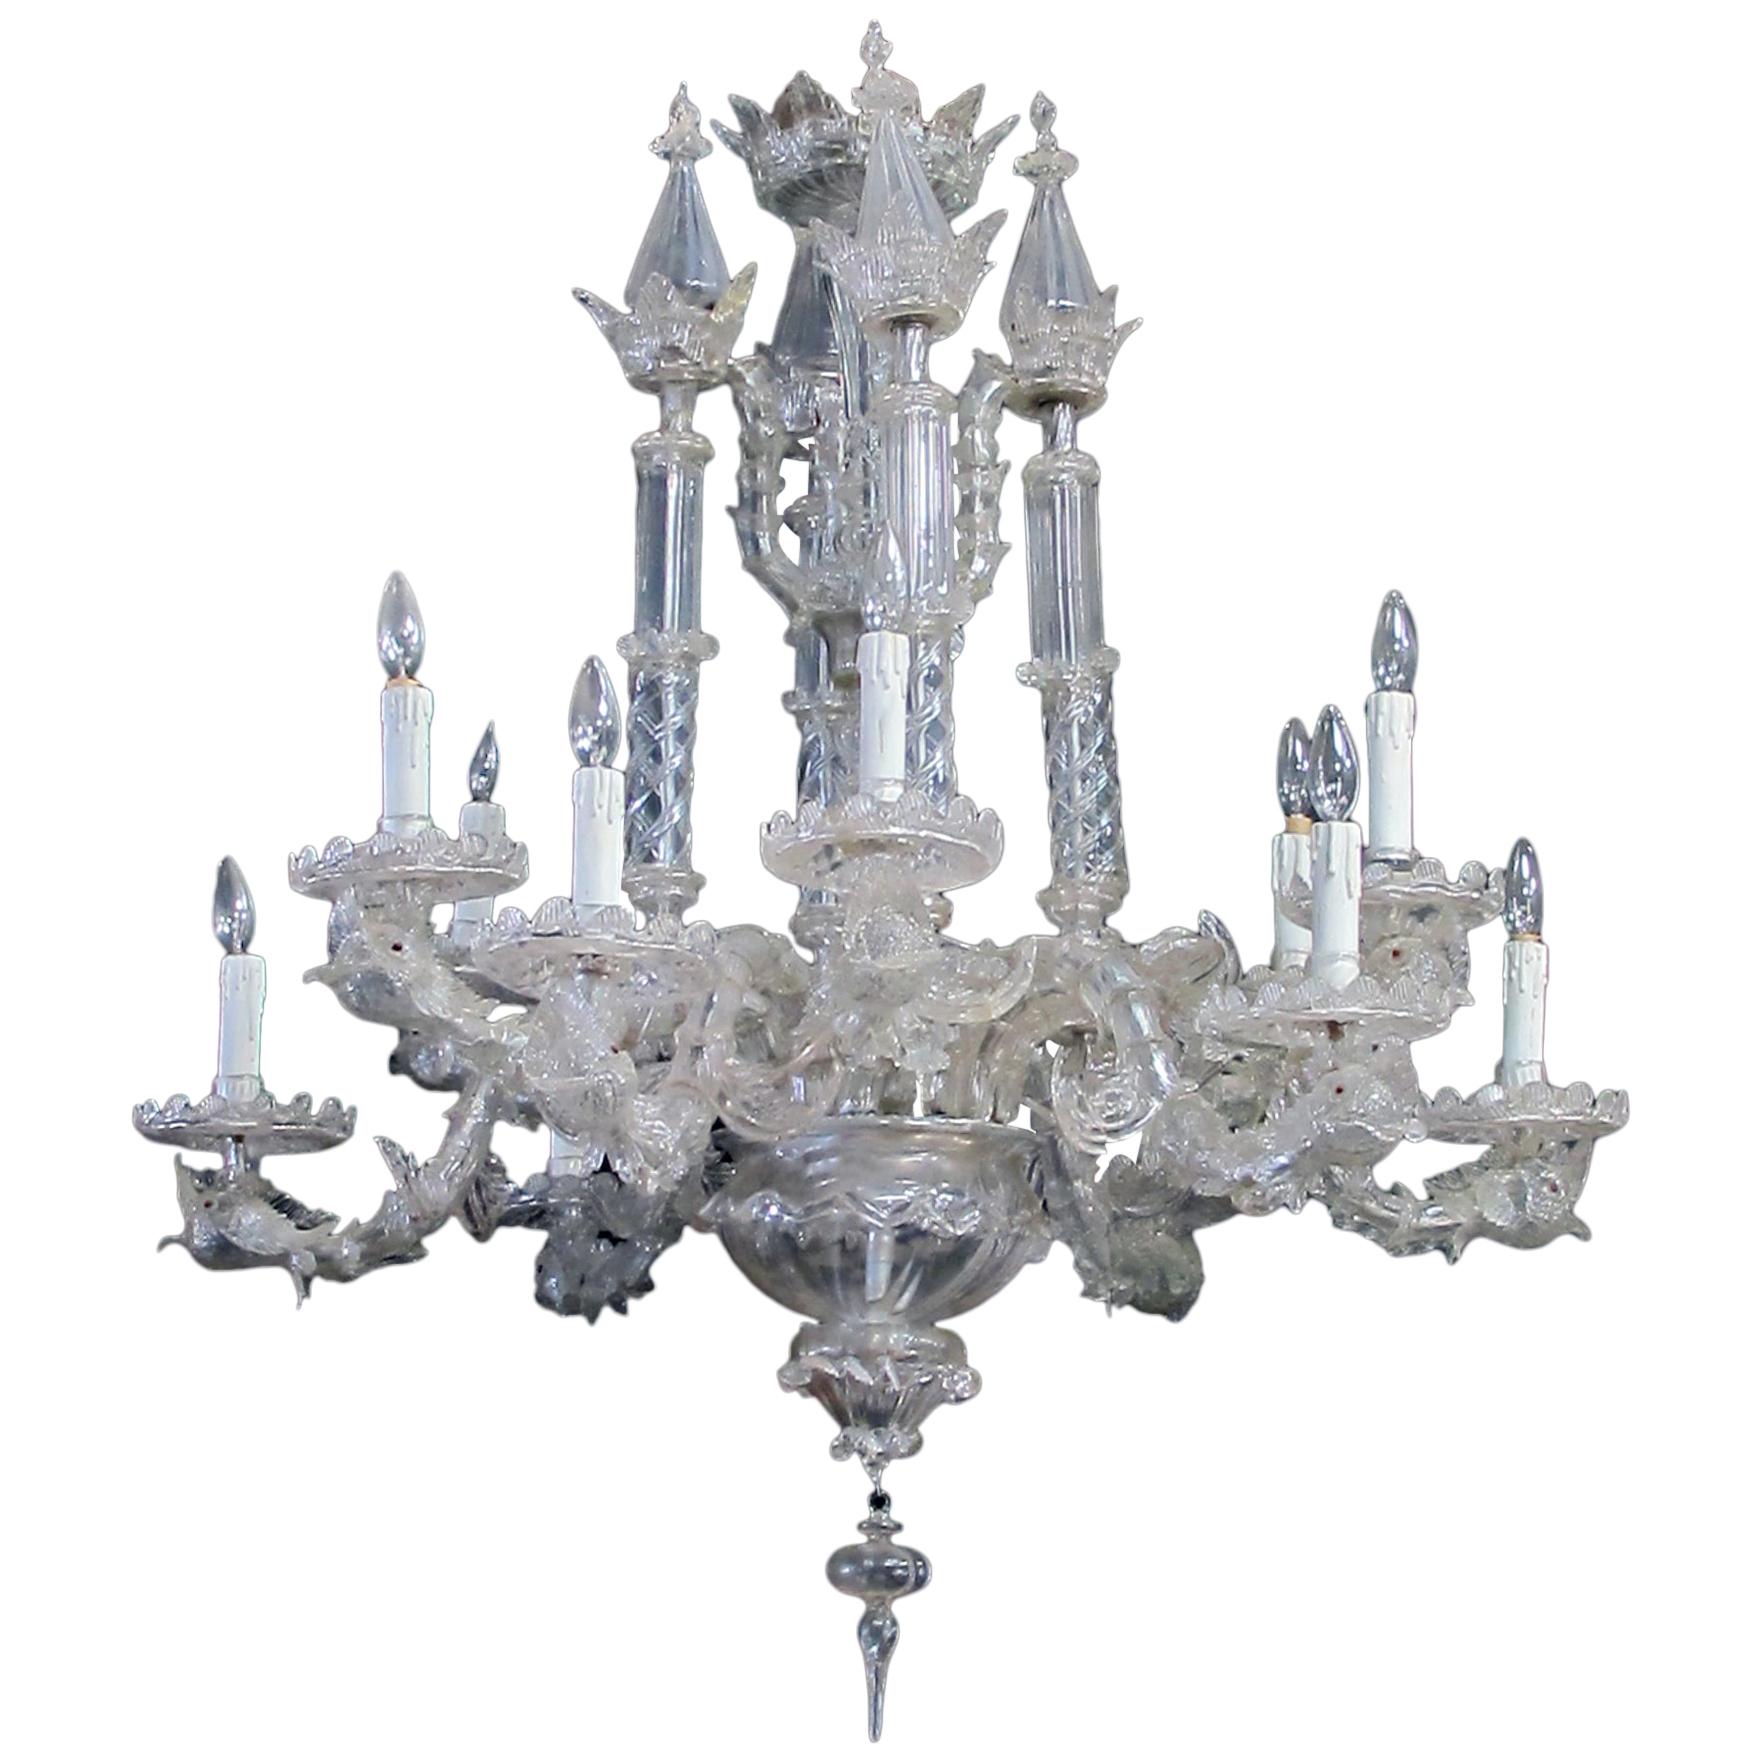 Impressive Venetian Glass 12-Light Chandelier with Dolphin-Form Arms